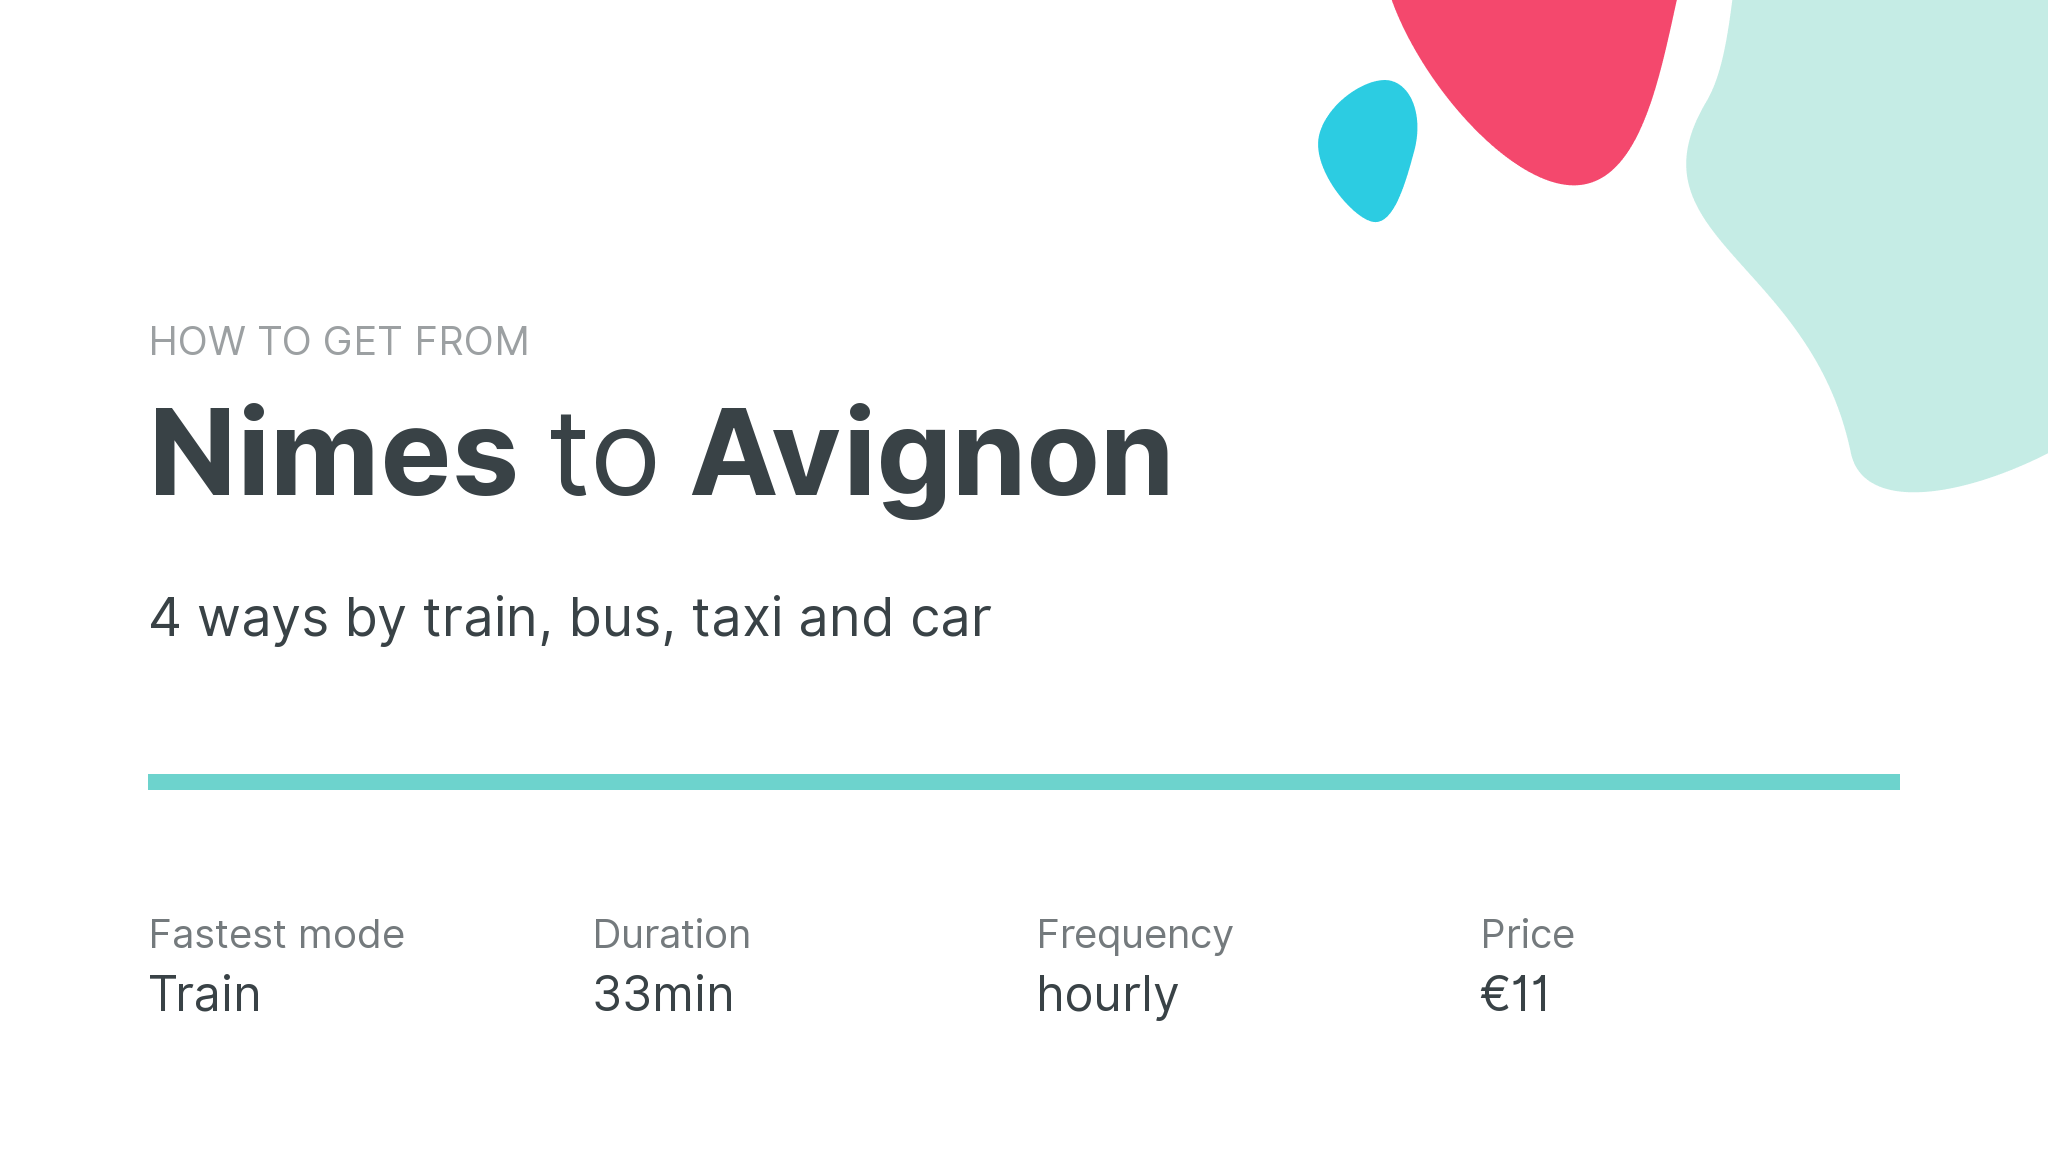 How do I get from Nimes to Avignon